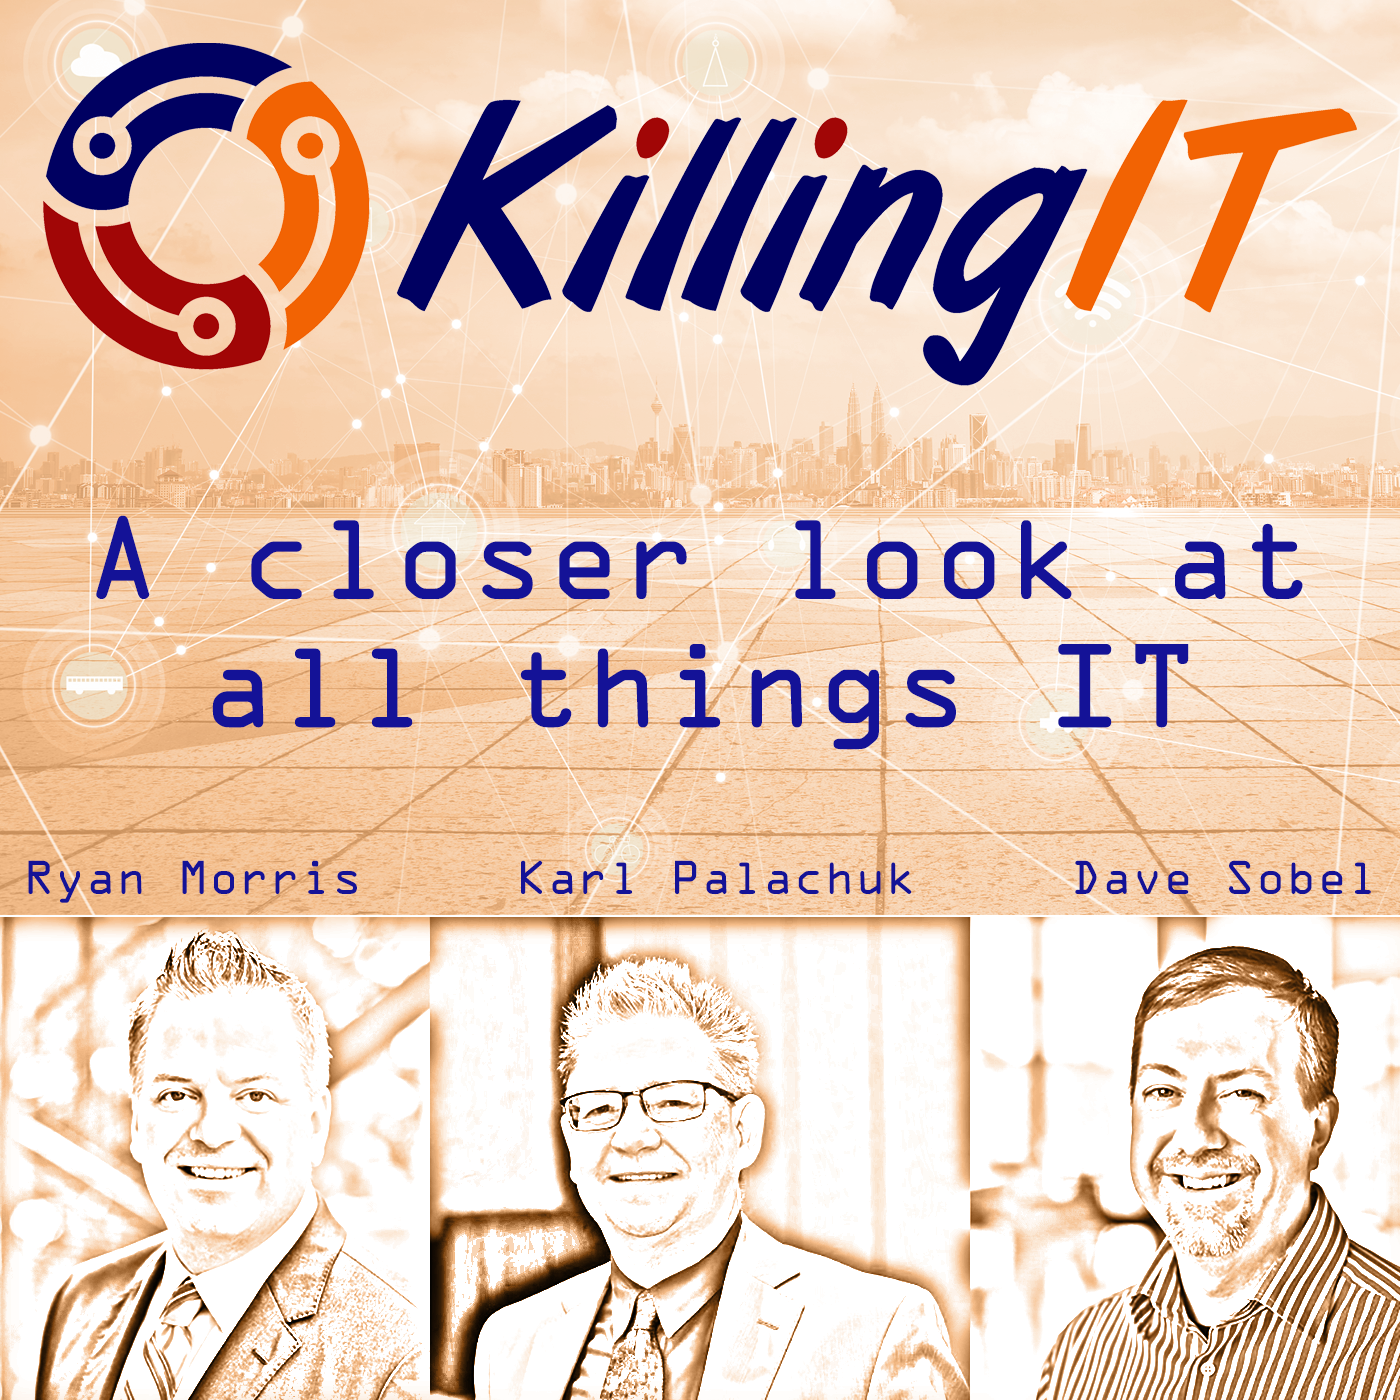 The Killing IT Podcast - with Ryan Morris, Karl Palachuk, and Dave Sobel